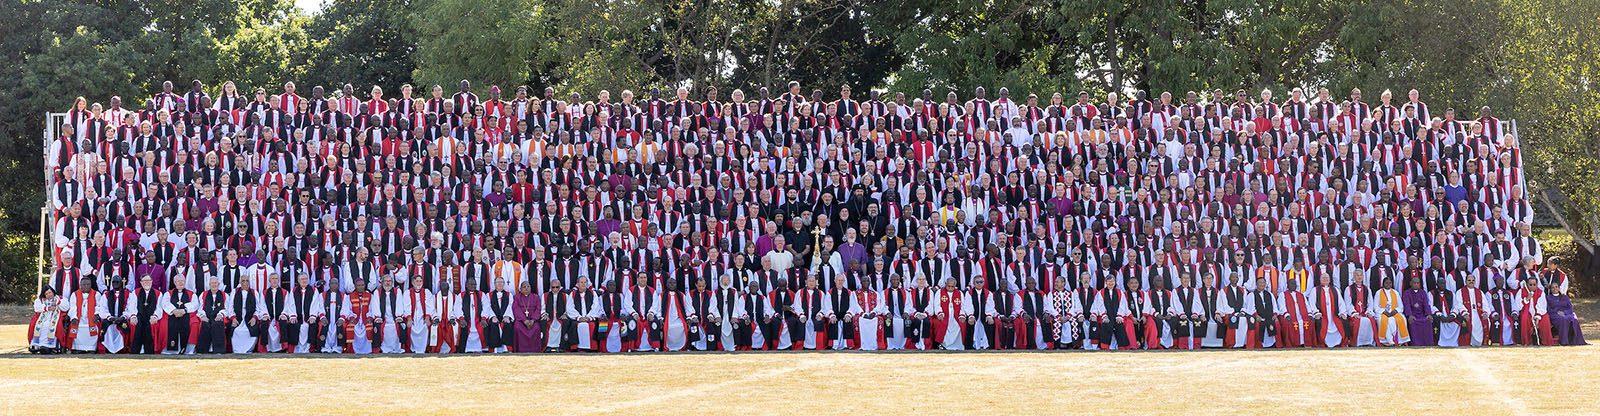 The Anglican Bishops attending the Lambeth Conference pose for their group photograph during the 2022 Lambeth Conference at the University of Kent in Canterbury, England, Friday, July 29, 2022. Photo by Neil Turner for The Lambeth Conference